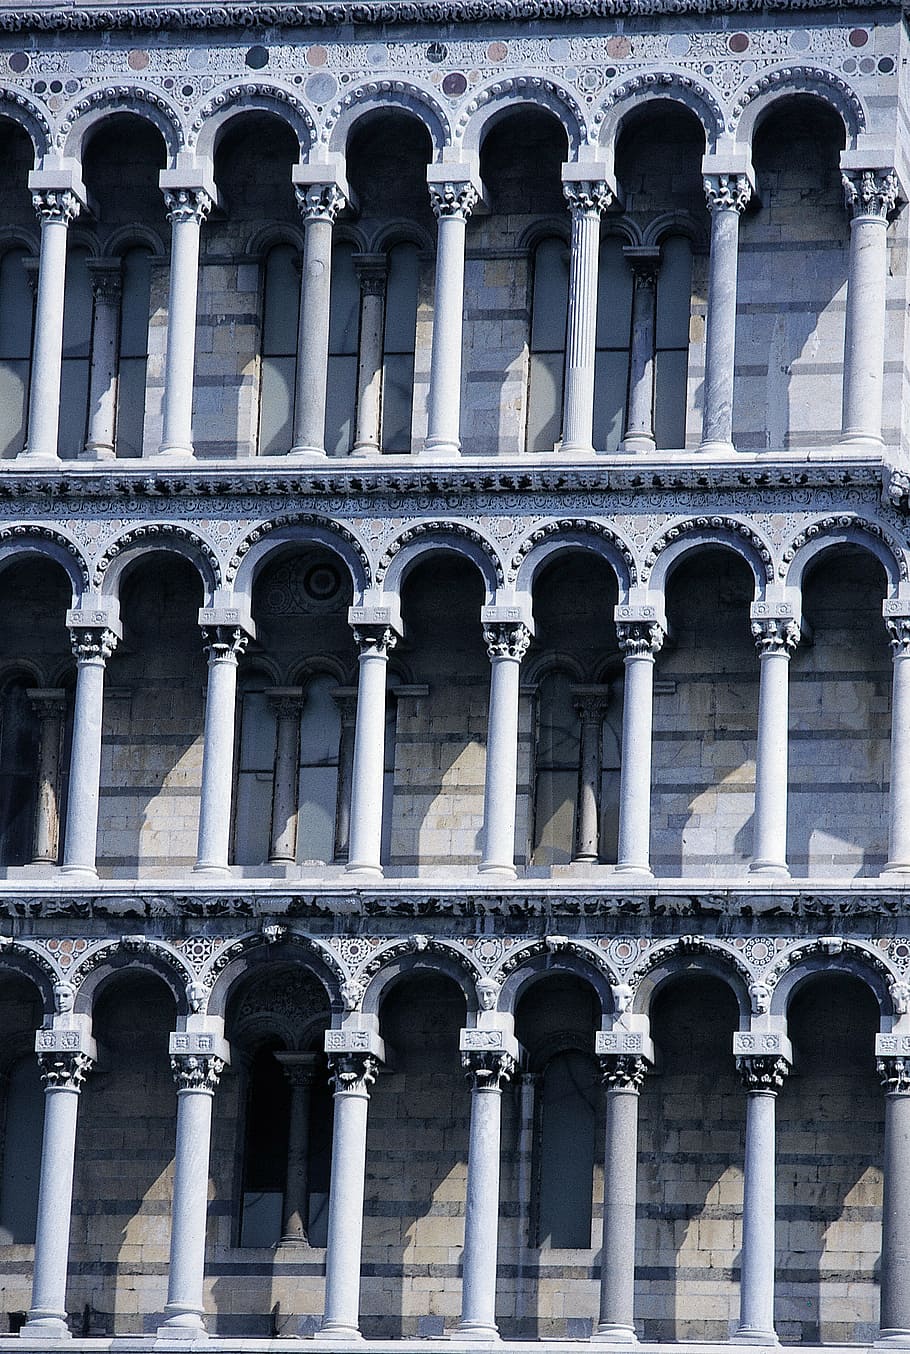 pisa, leaning tower, columnar, italy, tuscany, architecture, building, carrara marble, facade, scan kb dia